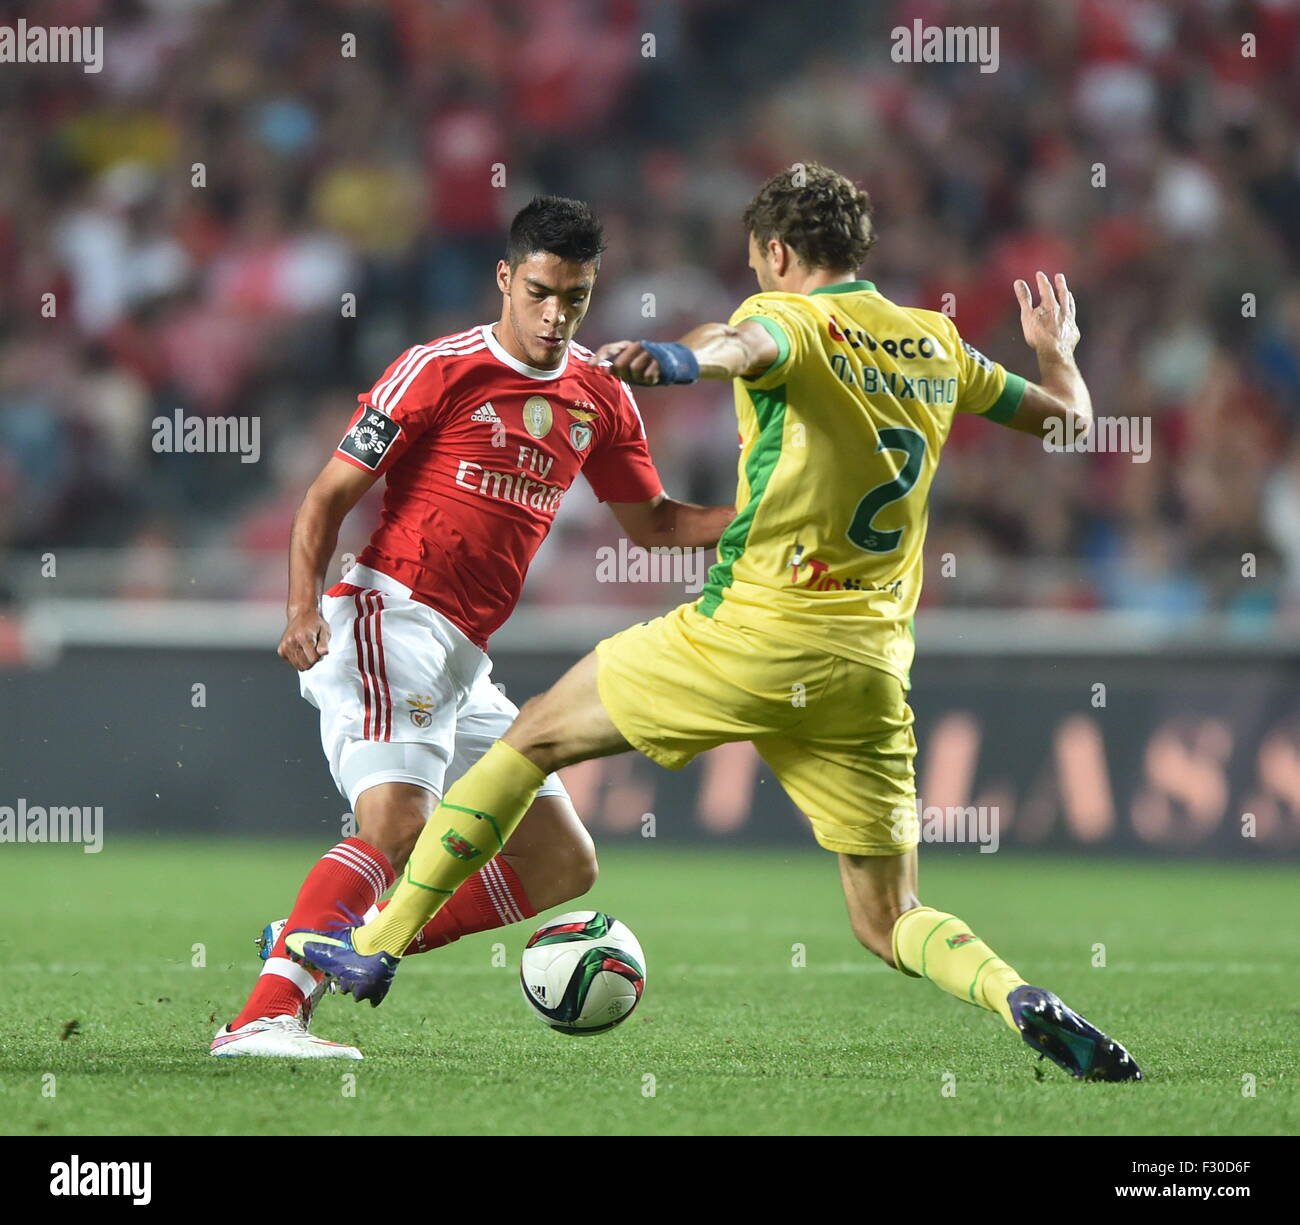 Lisbon, Portugal. 26th Sep, 2015. Pacos Ferreira's Marco Baixinho (R) vies the ball with Benfica's player during the 6th round of Portuguese league soccer match between Benfia and Pacos Ferreira at the Luz stadium in Lisbon, Portugal, Sept. 26, 2015. Benfica beat Pacos Ferreira 3-0. © Zhang Liyun/Xinhua/Alamy Live News Stock Photo